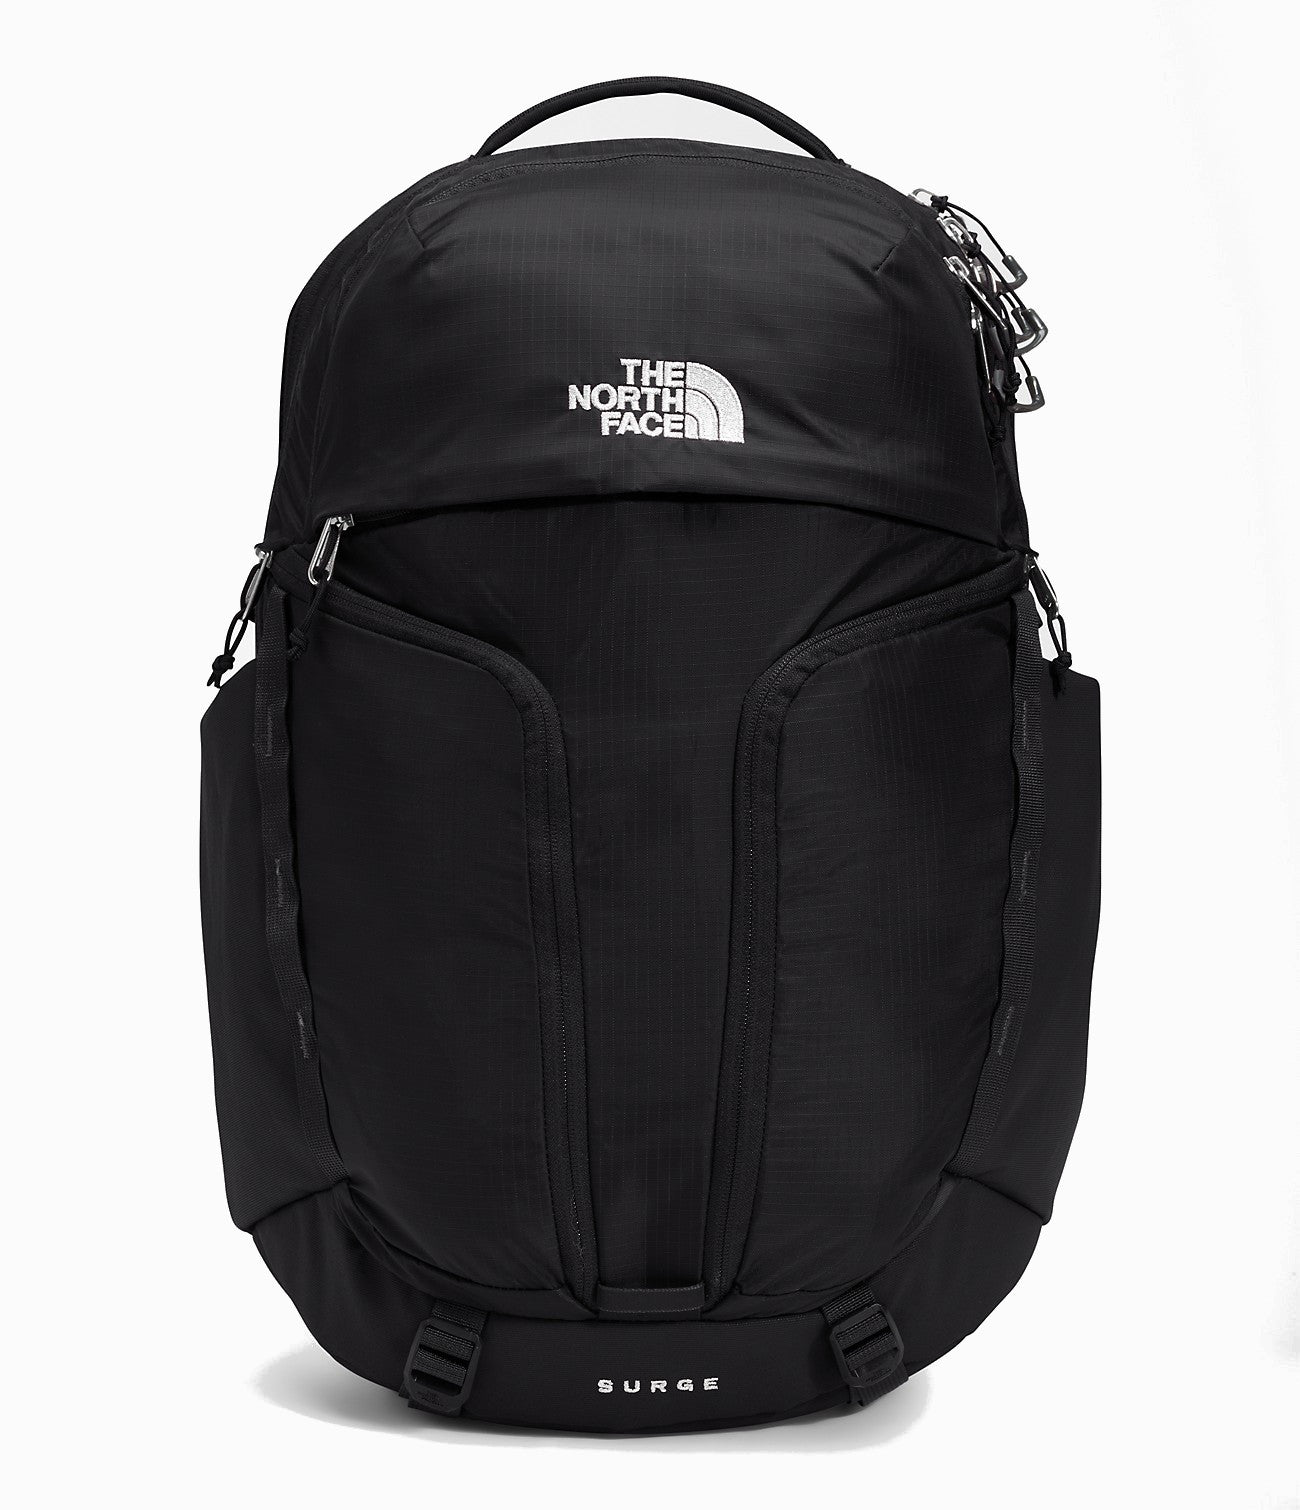 The North Face Women's Surge Backpack Accessories North Face TNF Black/TNF Black-KX7  